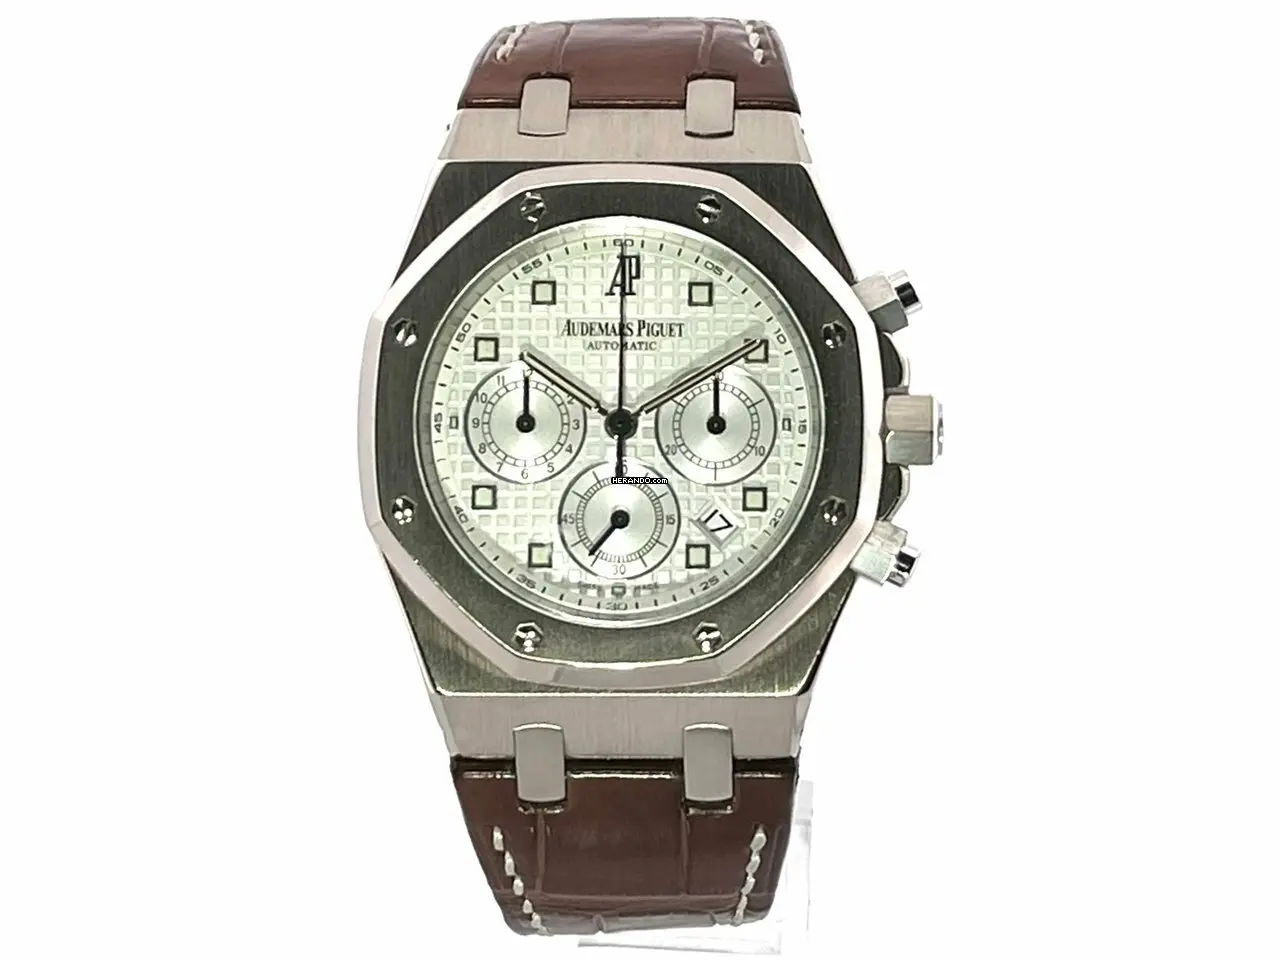 watches-294257-24209989-rpjv81w4079oas4tnfeap5ss-ExtraLarge.webp